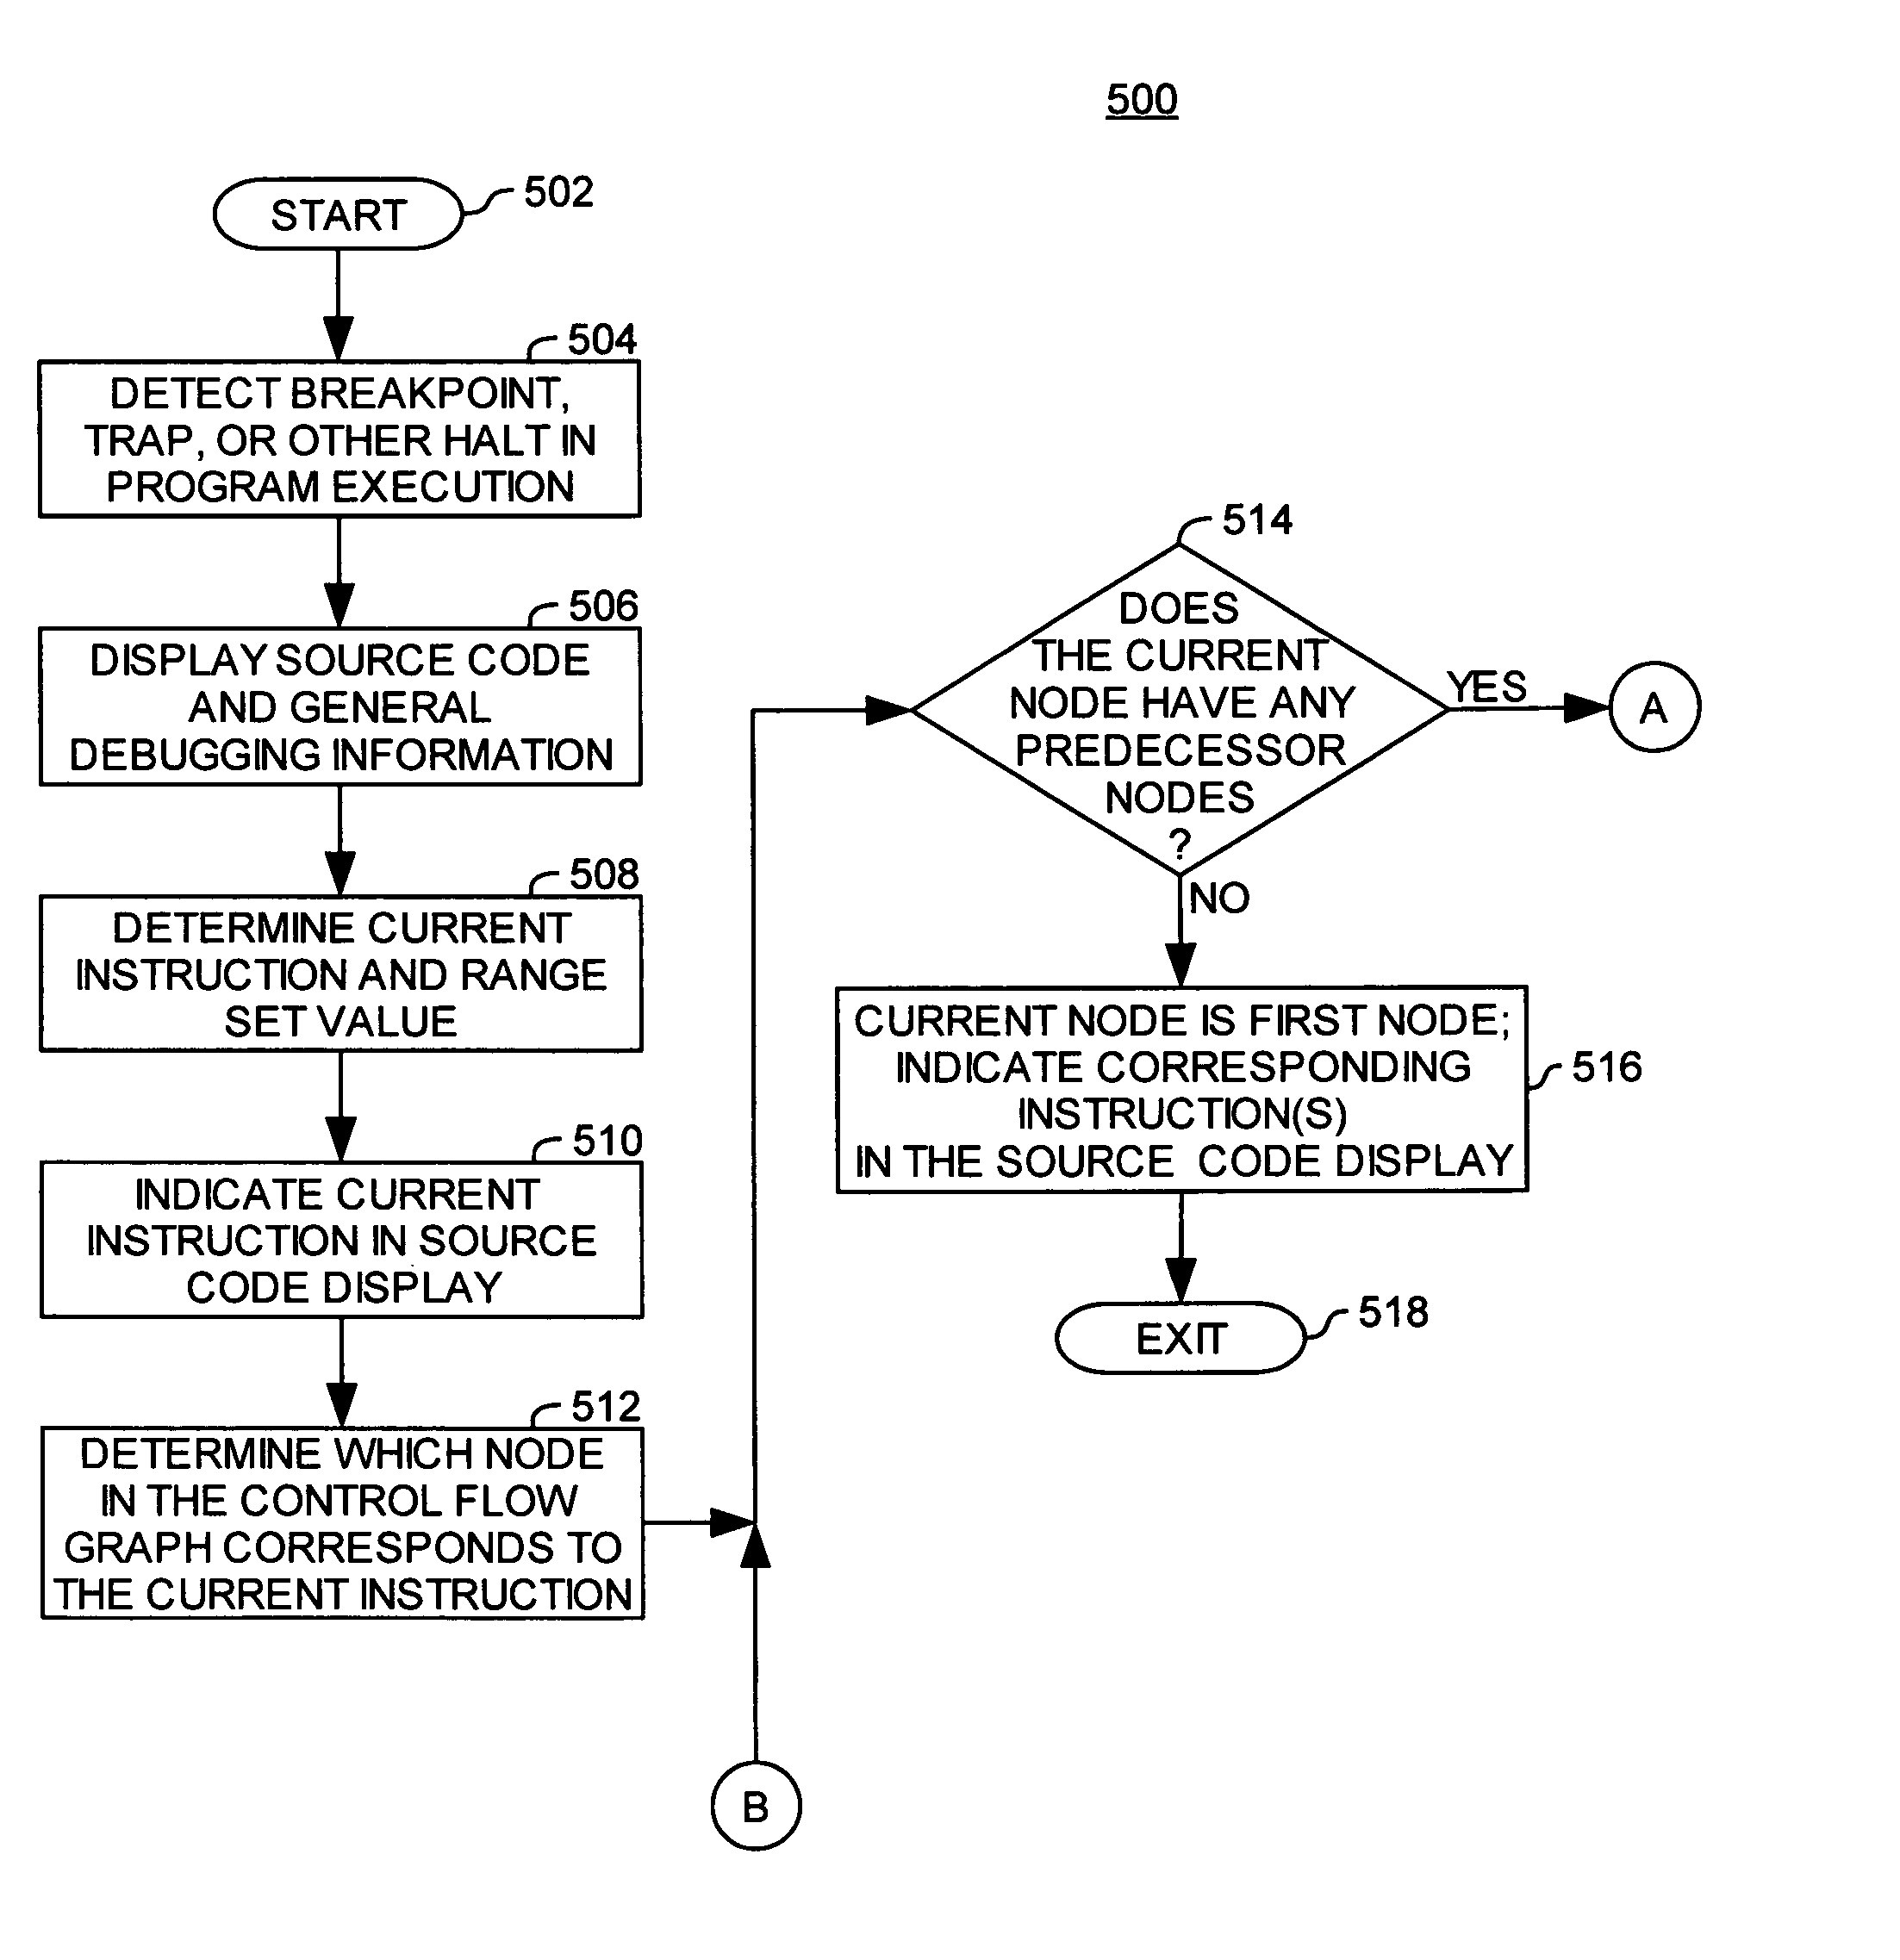 Method of tracing back the execution path in a debugger